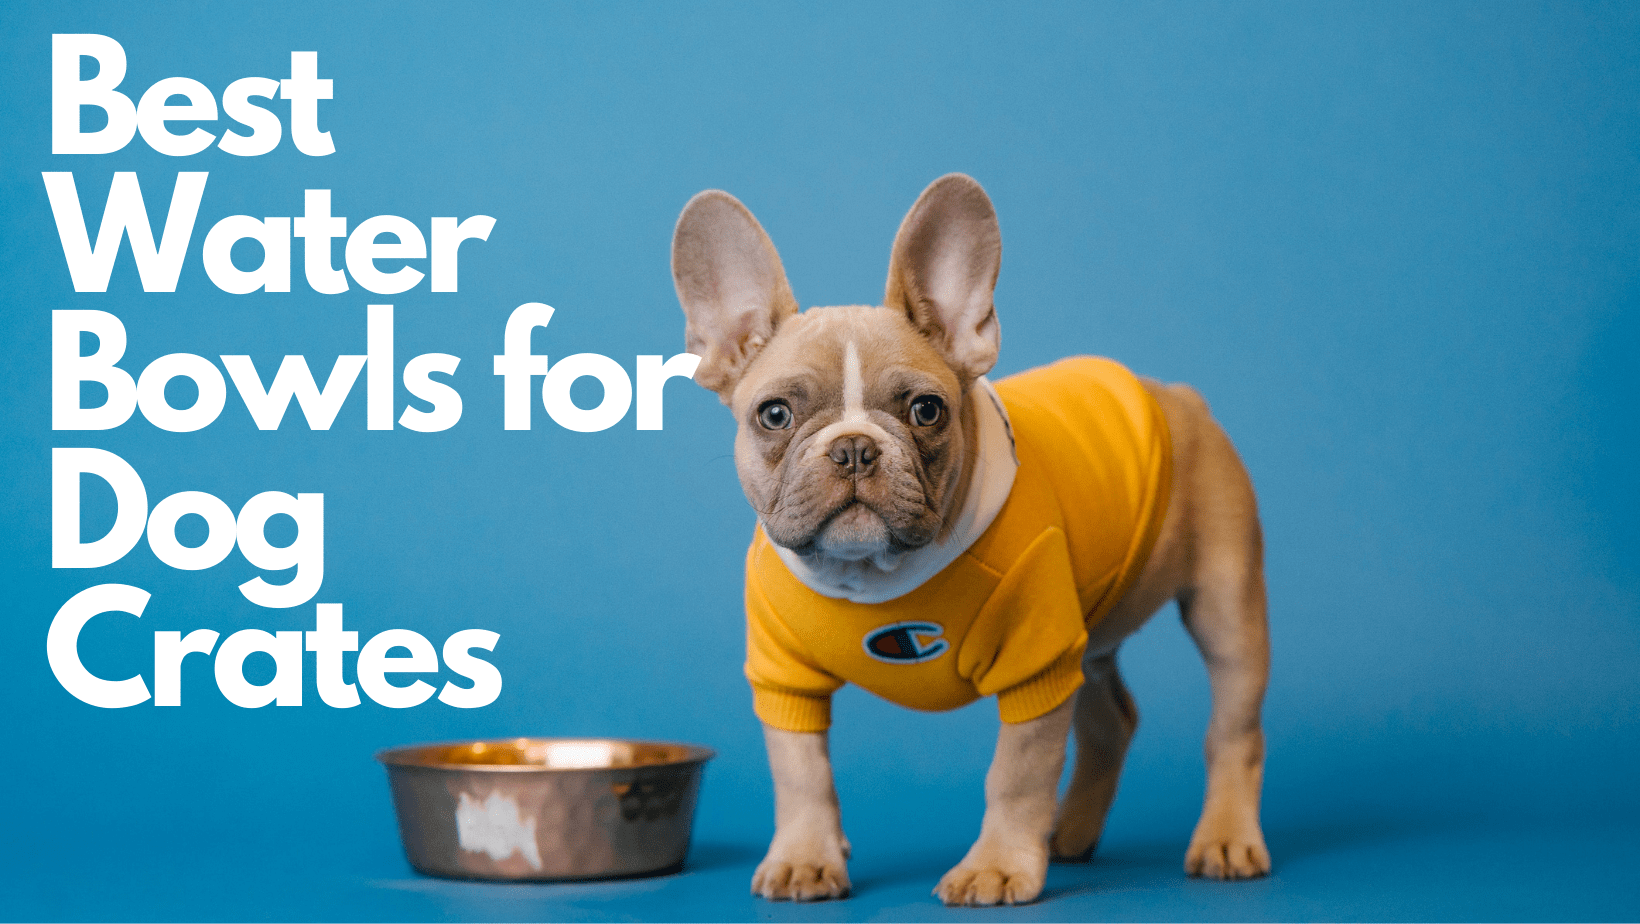 Best Water Bowls for Dog Crates